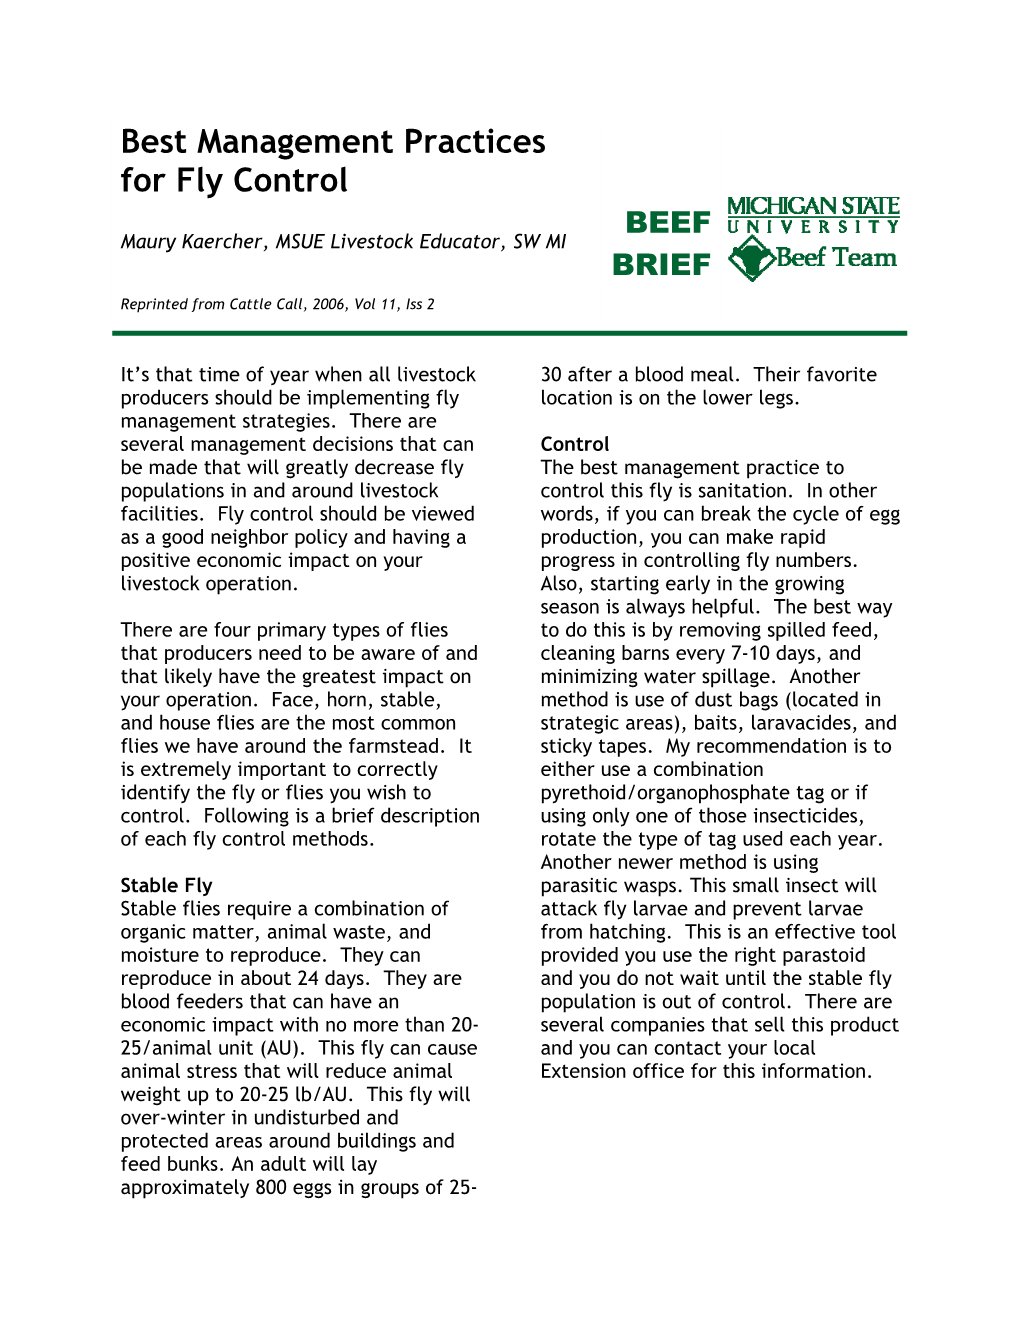 Best Management Practices for Fly Control BEEF Maury Kaercher, MSUE Livestock Educator, SW MI BRIEF Reprinted from Cattle Call, 2006, Vol 11, Iss 2